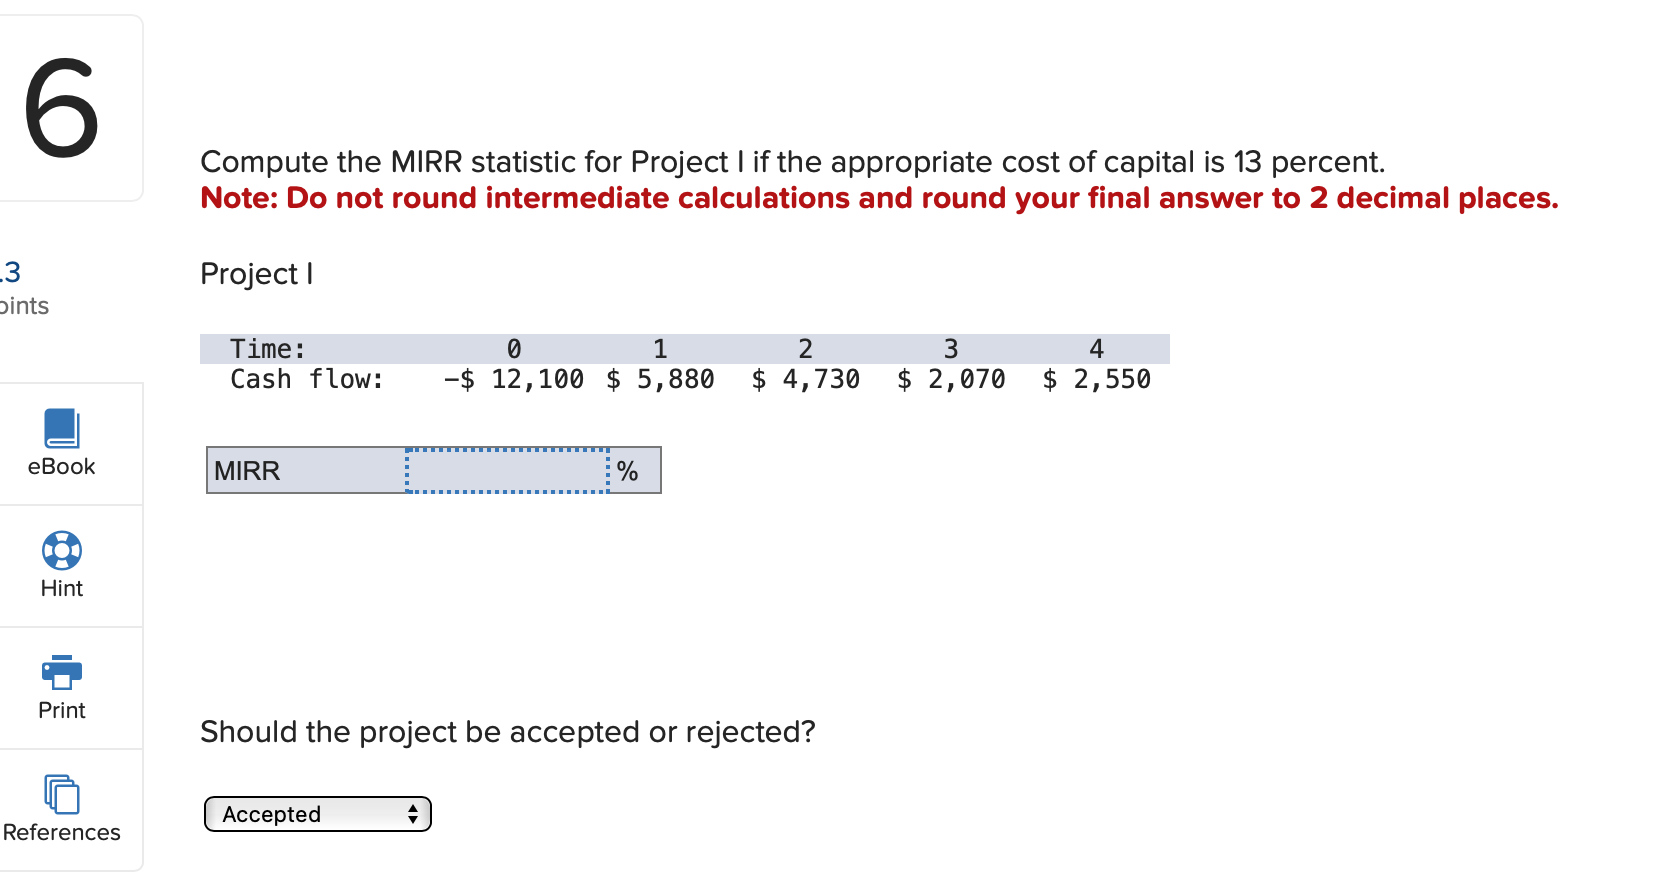 6 .3 Dints eBook COO Hint Print References Compute the MIRR statistic for Project I if the appropriate cost